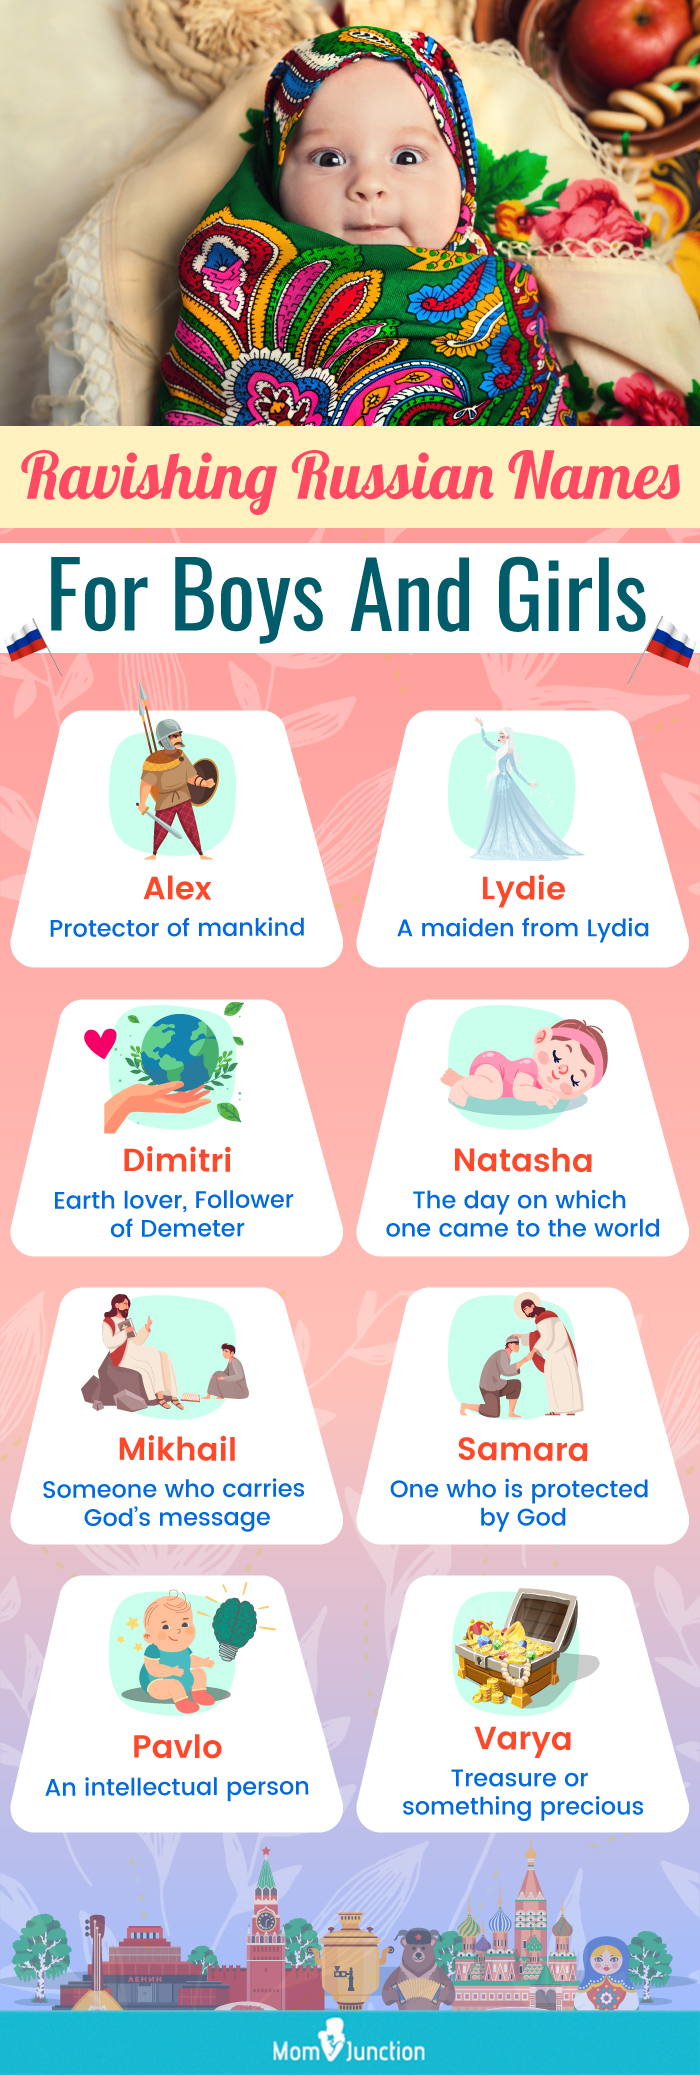 ravishing russian names for boys and girls (infographic)